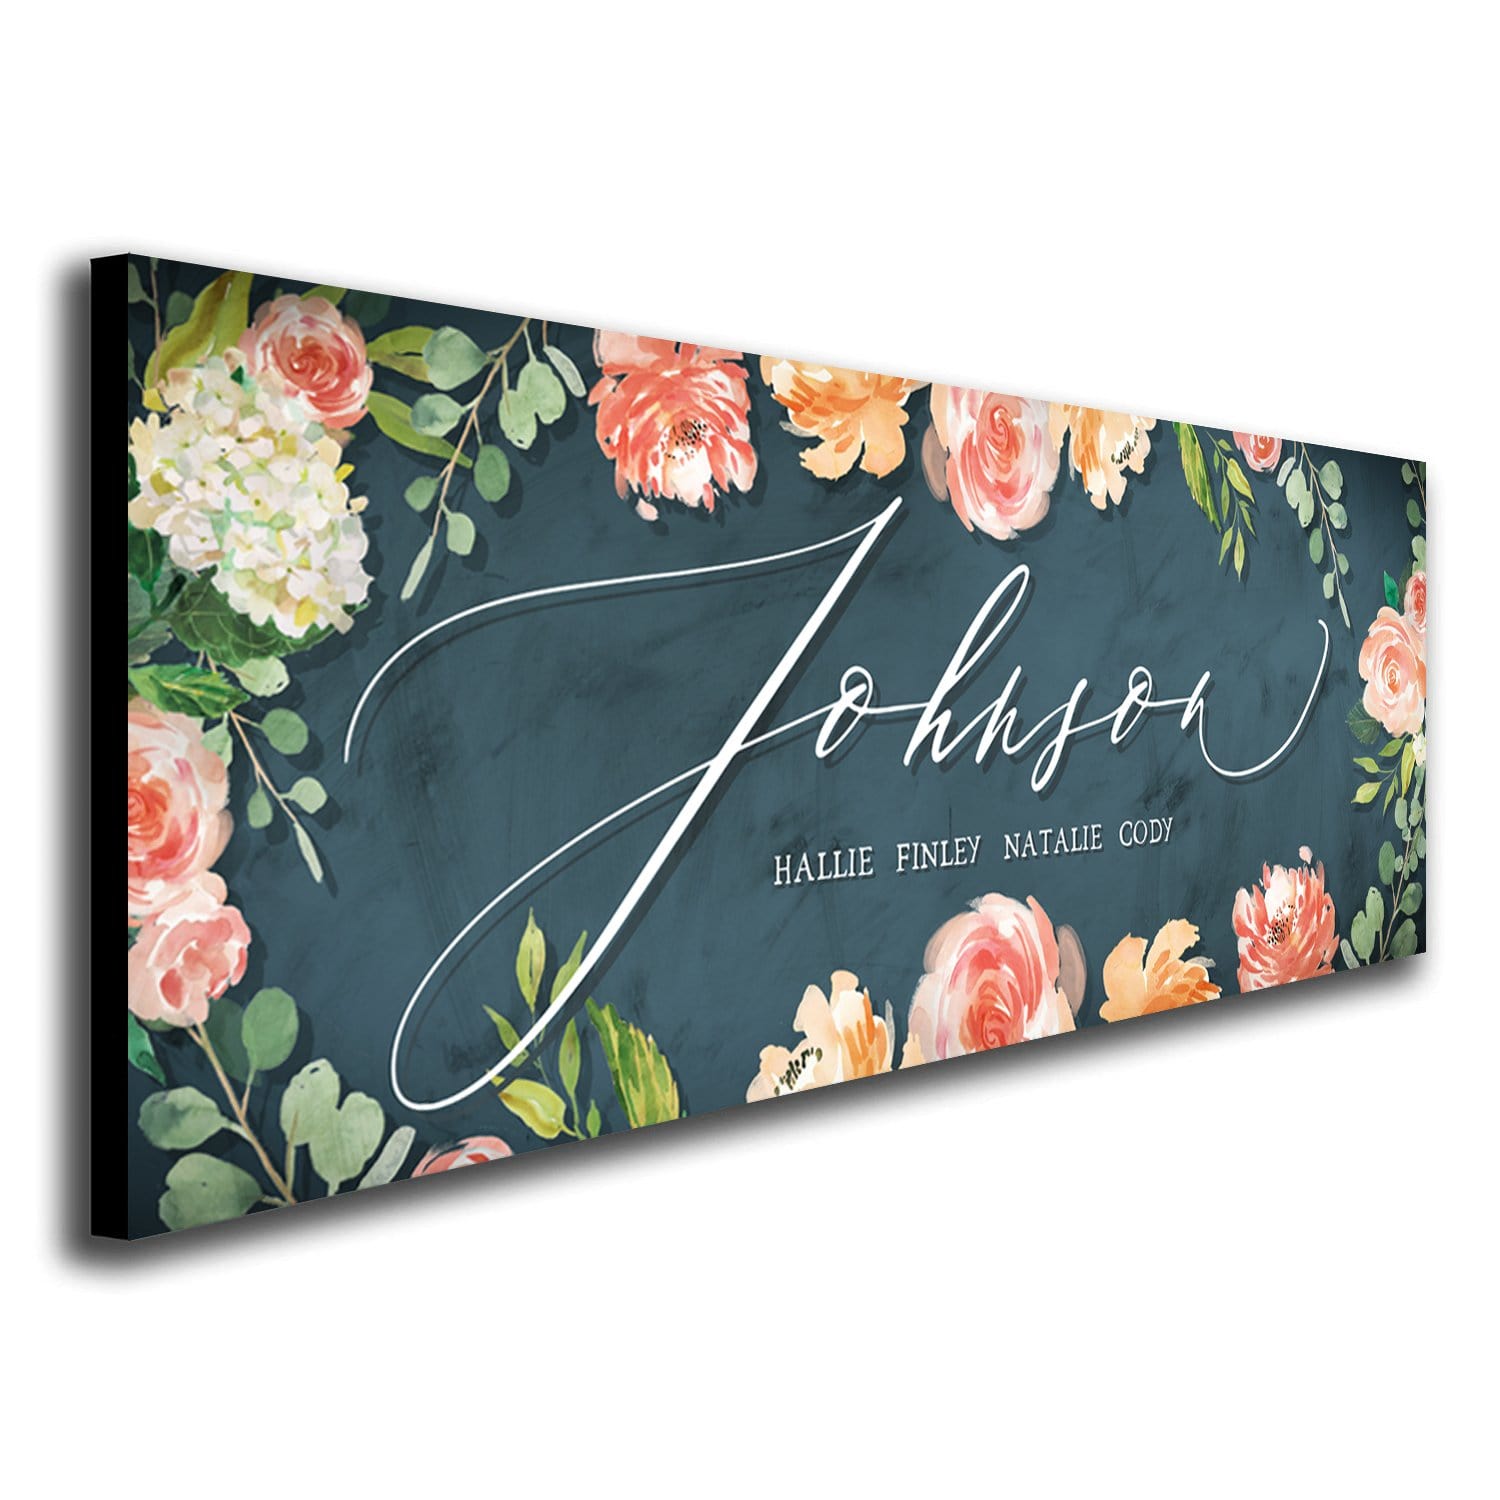 Personalized watercolor style botanical/ flower/ floral art print mounted to wood block - angled view